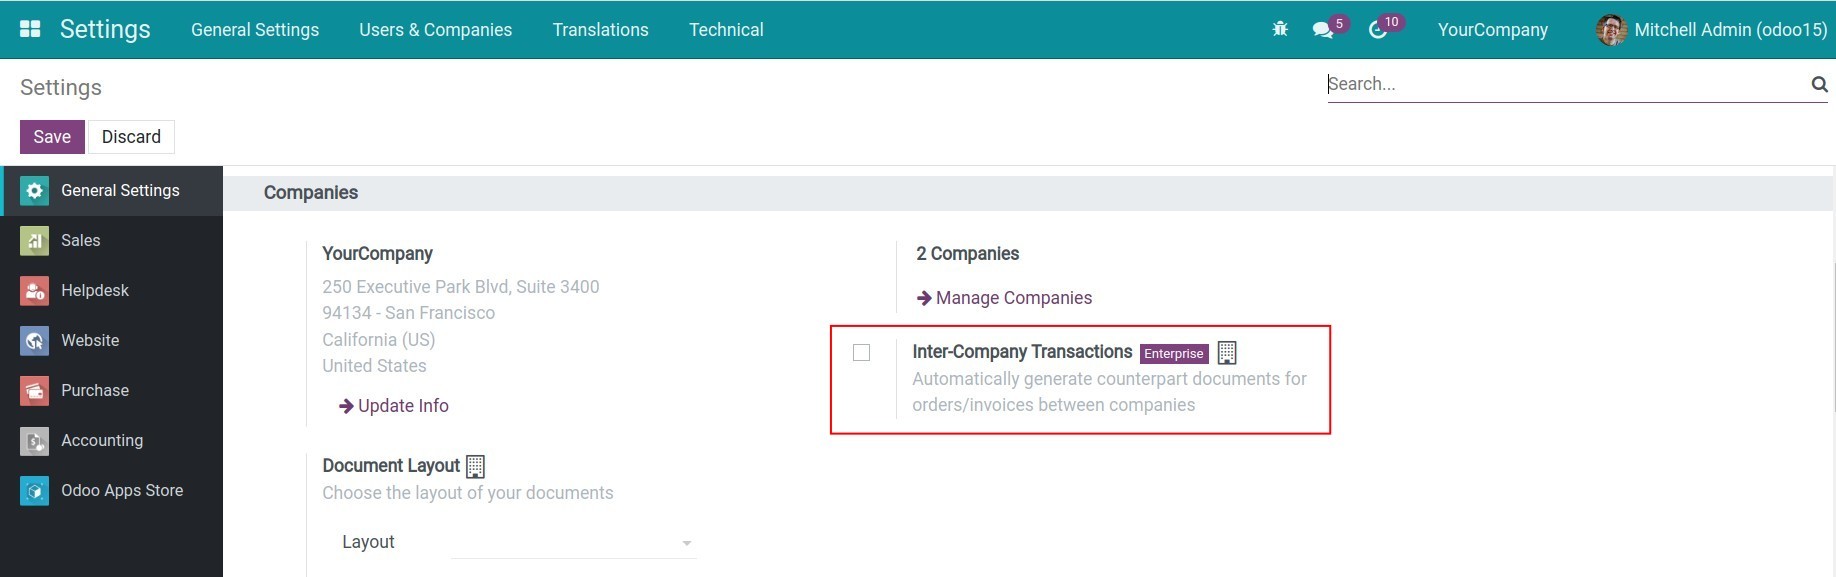 Hide the Inter-Company Transactions feature